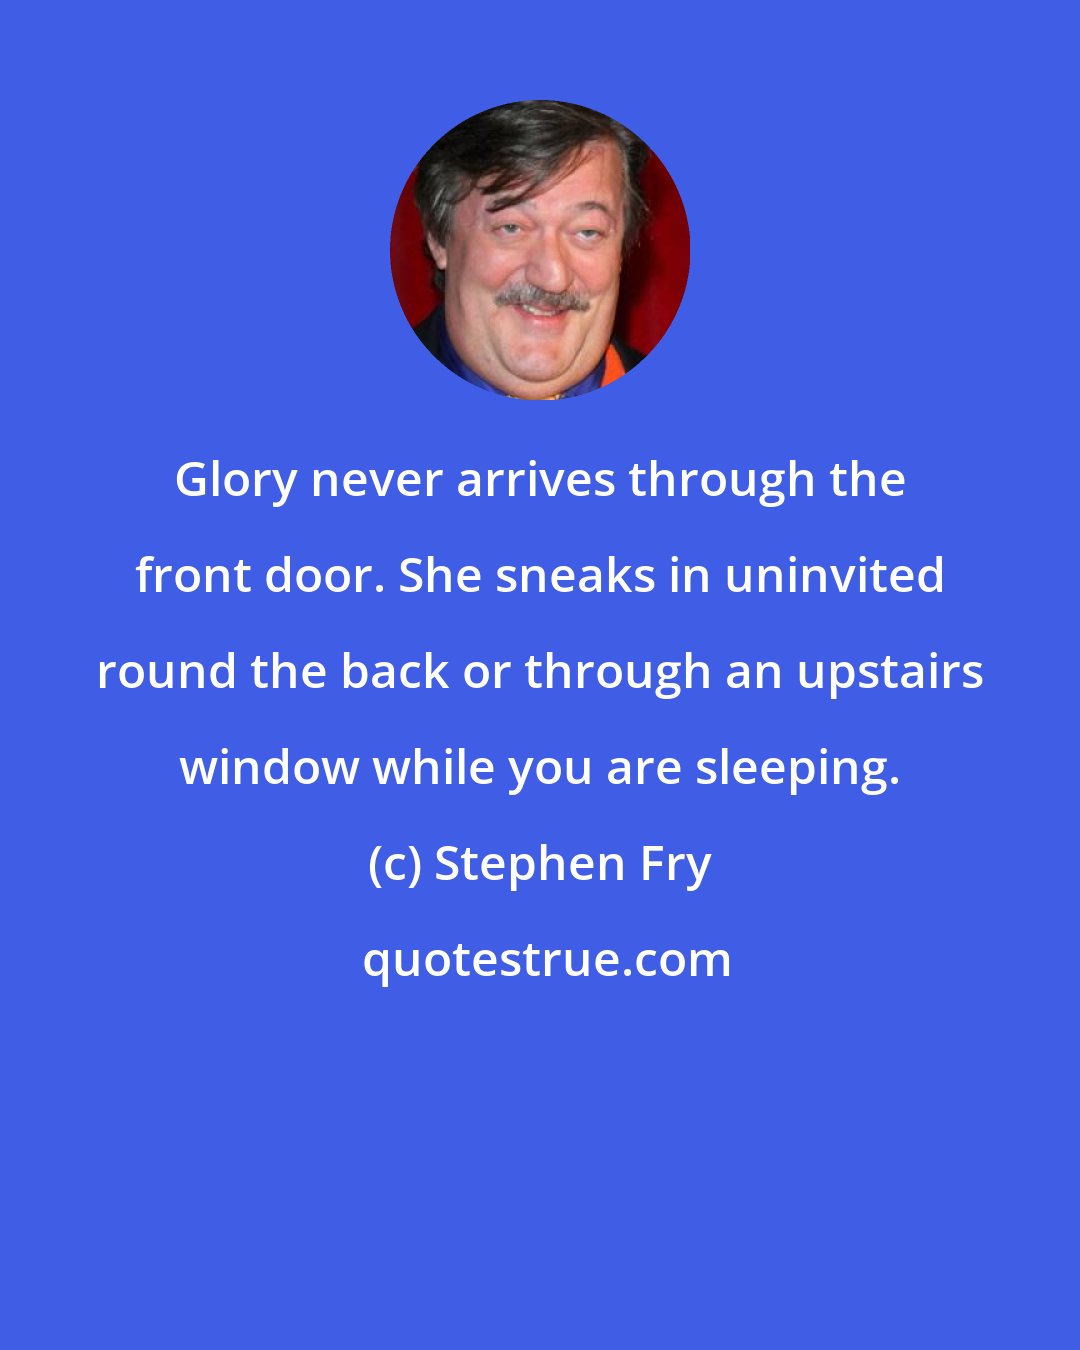 Stephen Fry: Glory never arrives through the front door. She sneaks in uninvited round the back or through an upstairs window while you are sleeping.